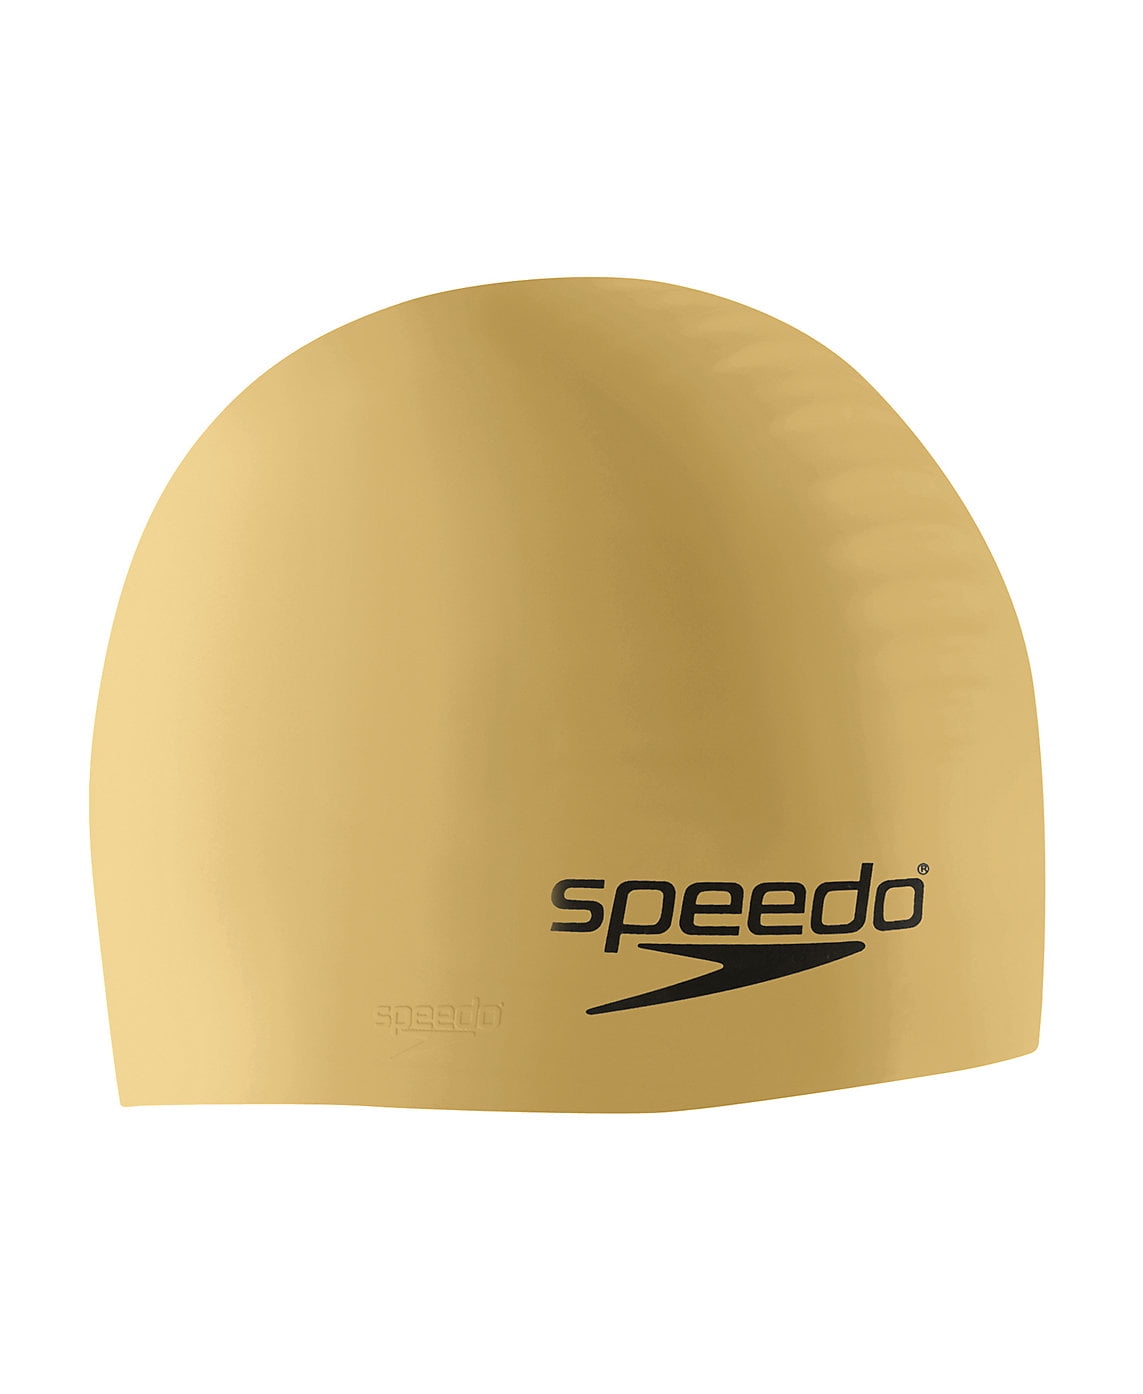 GOLD ADULT SIZE SPEEDO SILICONE SWIMMING CAP 